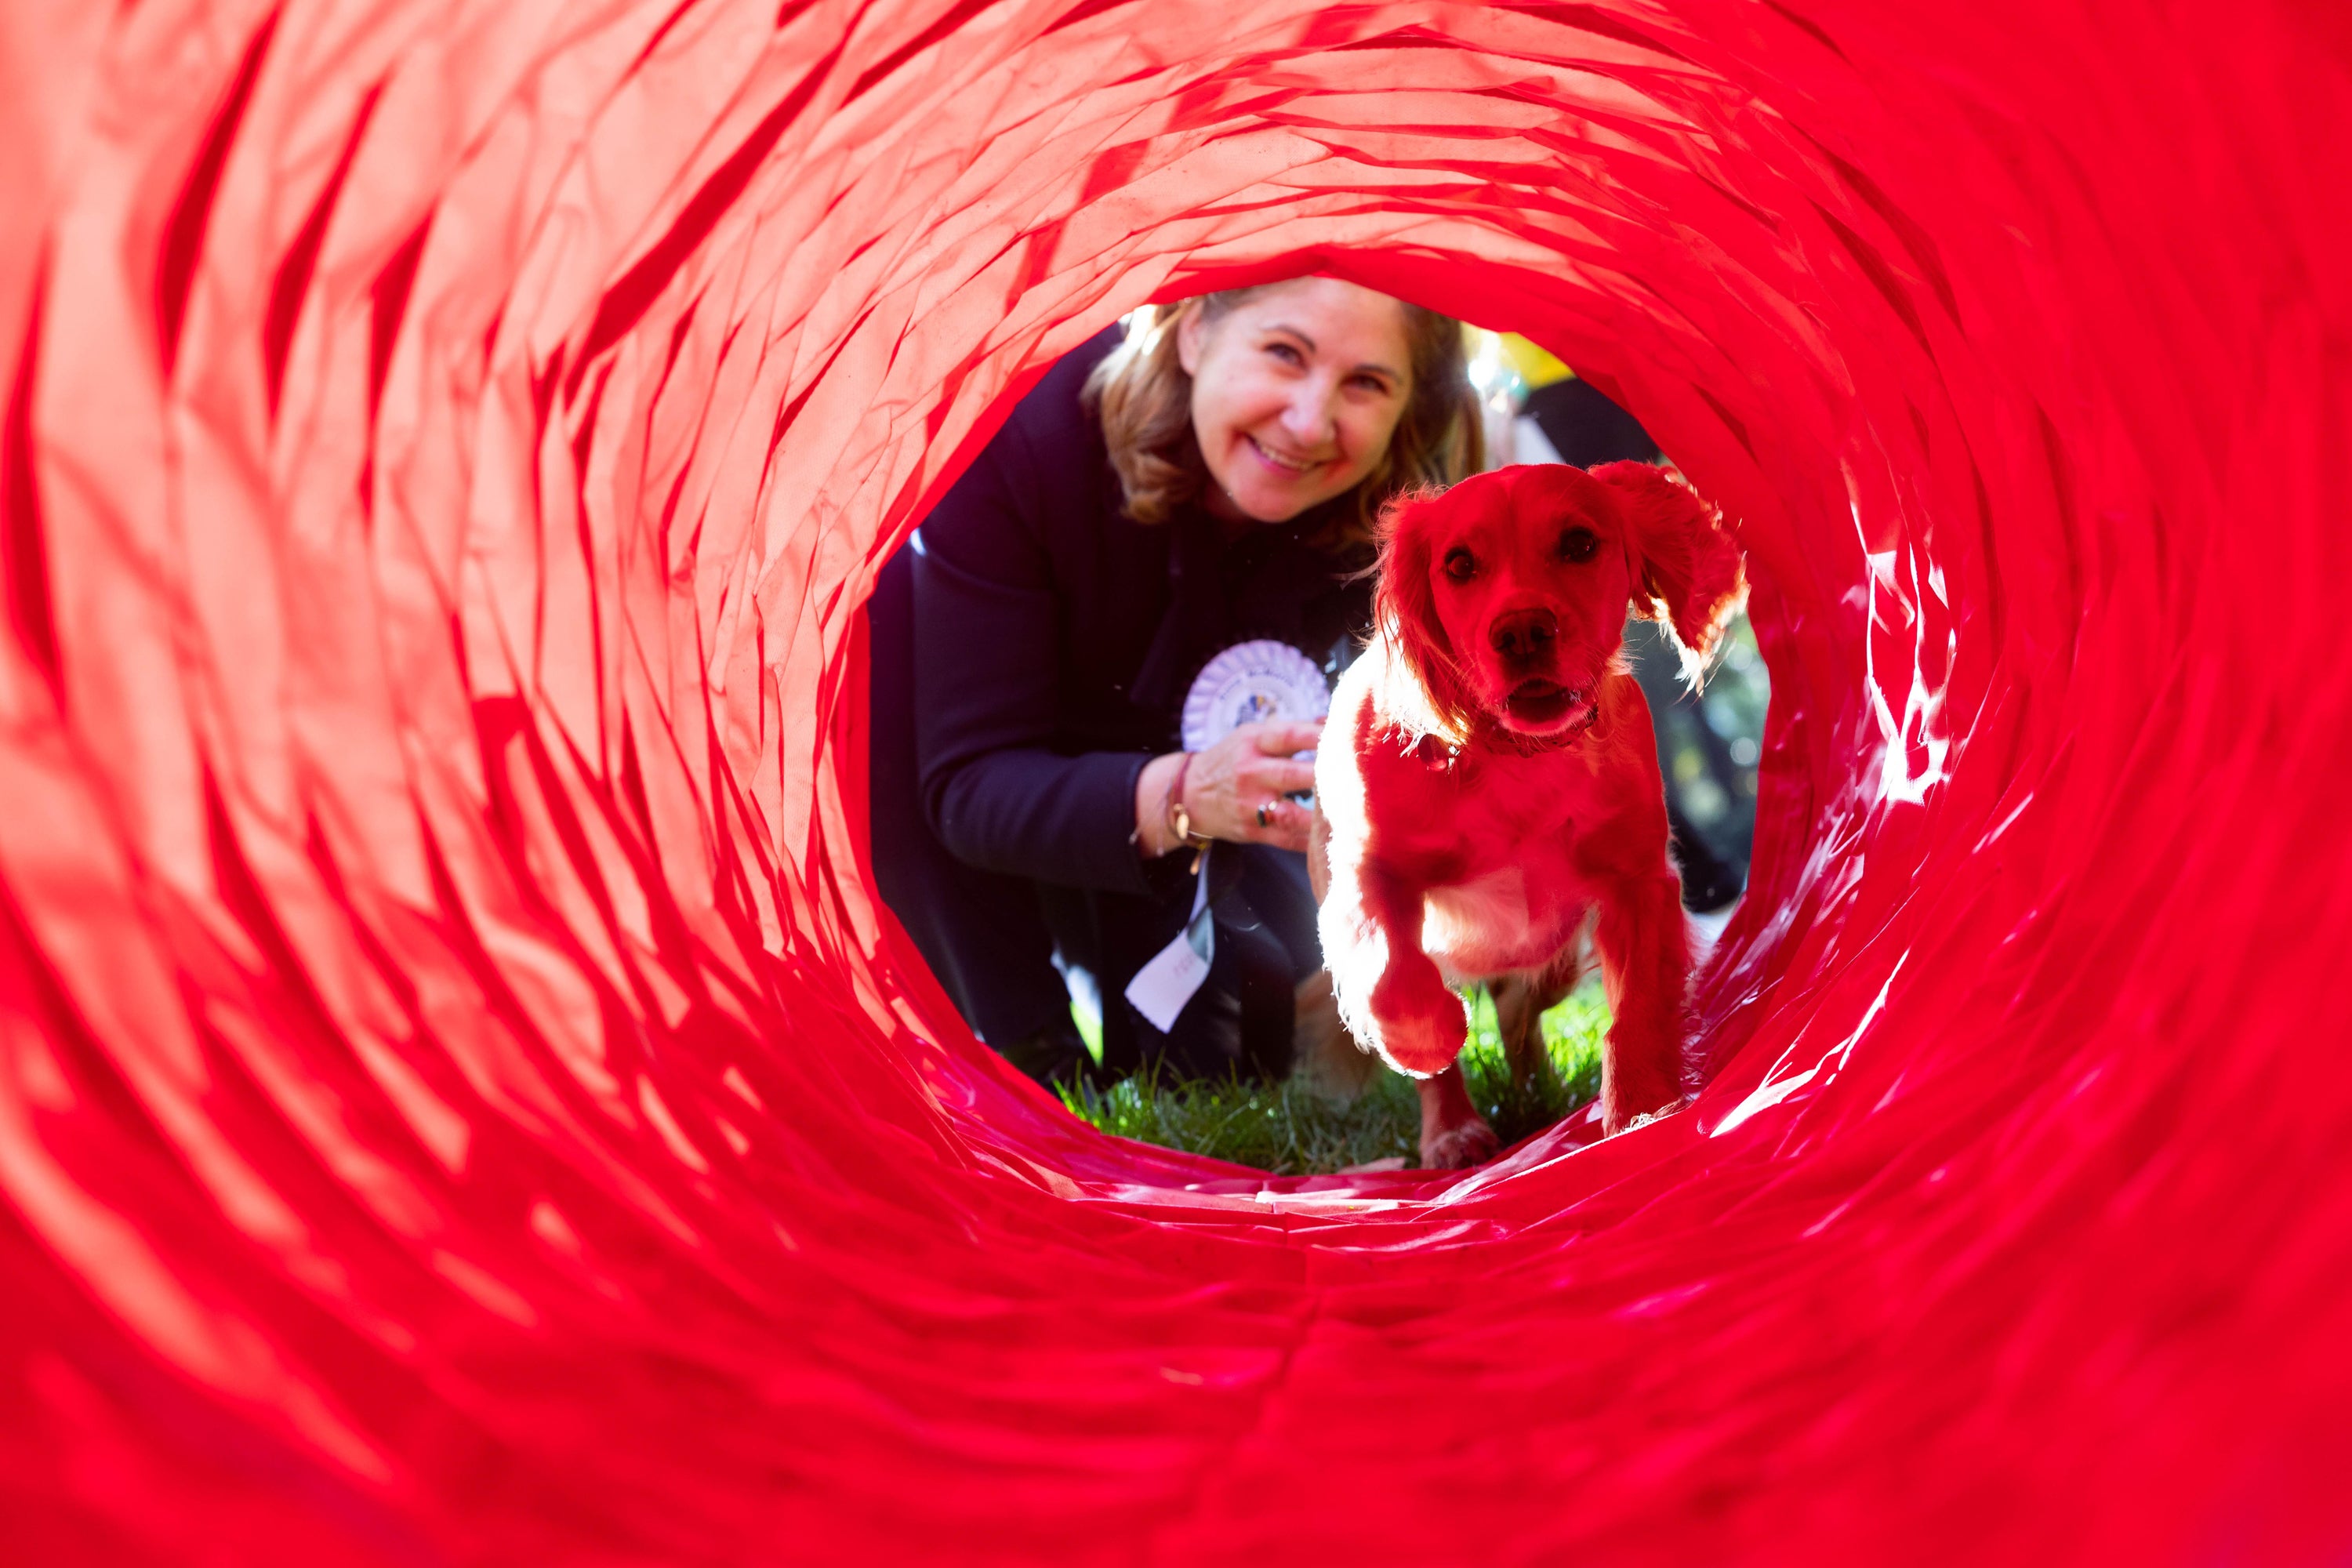 Ms McMorrin taking part in last year’s Westminster Dog of the Year competition (David Parry/PA)